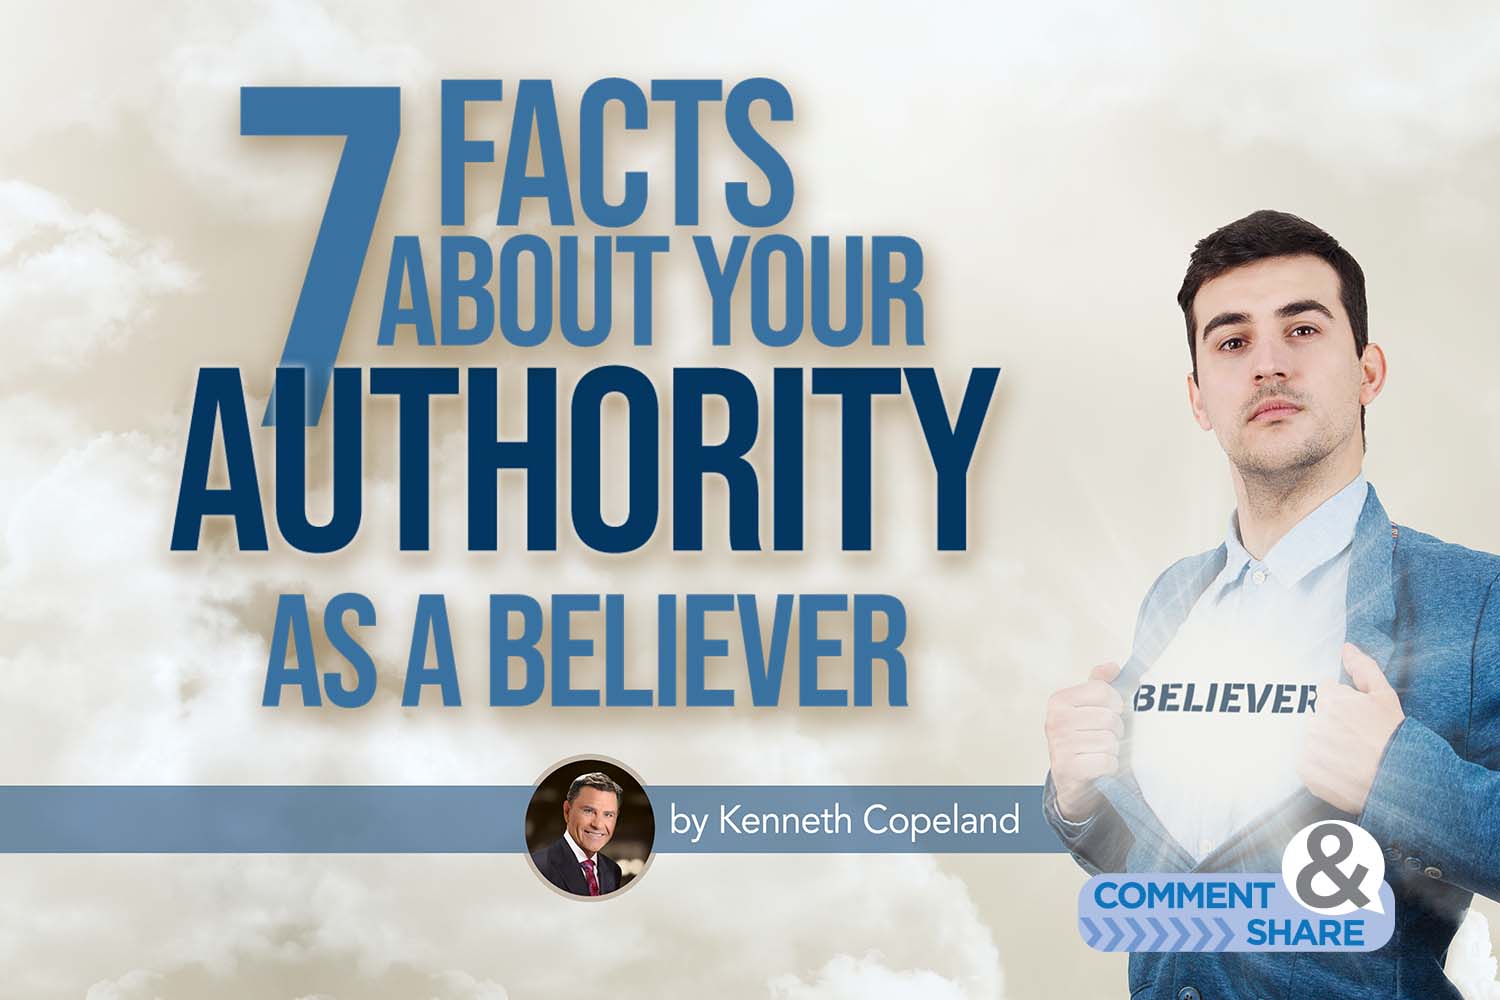 7 Facts About Your Authority As a Believer